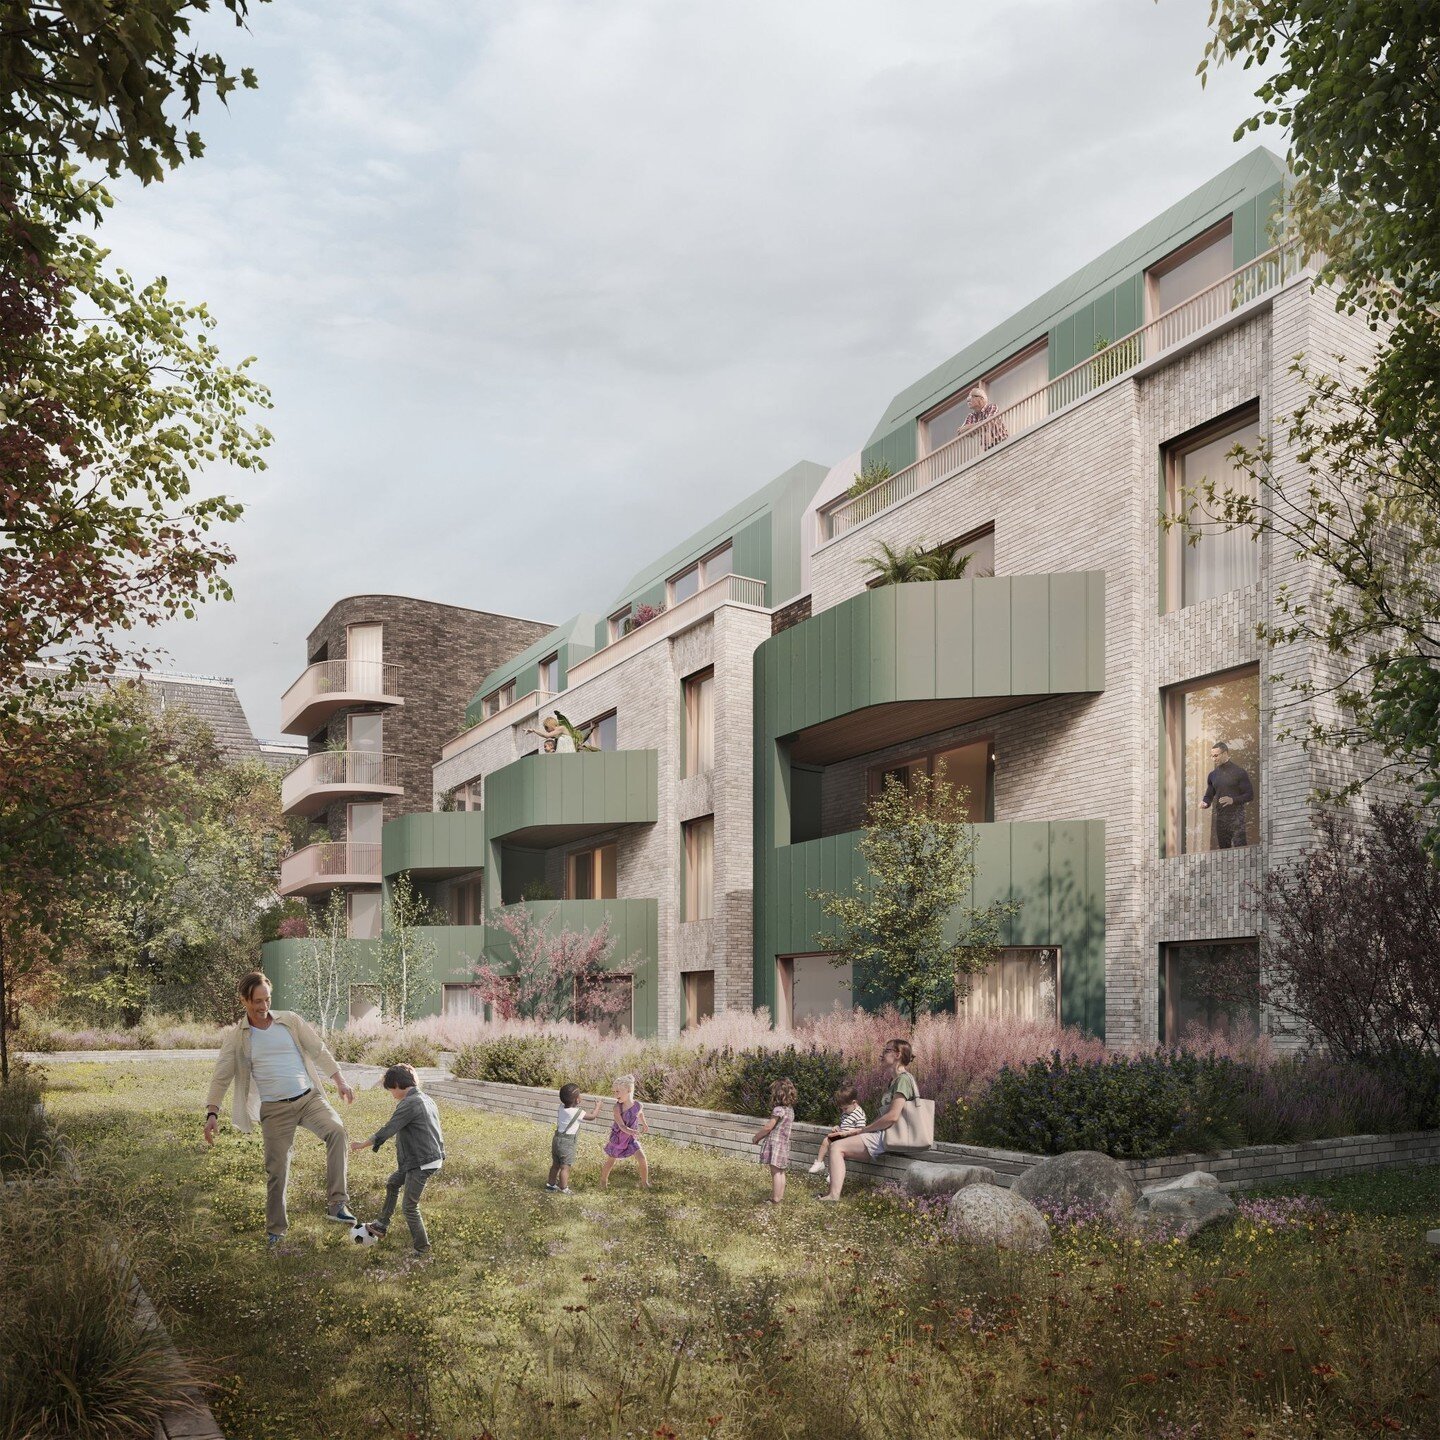 Westbury Road is a unique development set within an underutilised plot in Forest Gate, East London. The proposal creates 16 new high quality residential homes within a dense urban environment and new public space for the residents. ⁠
⁠
Using the site